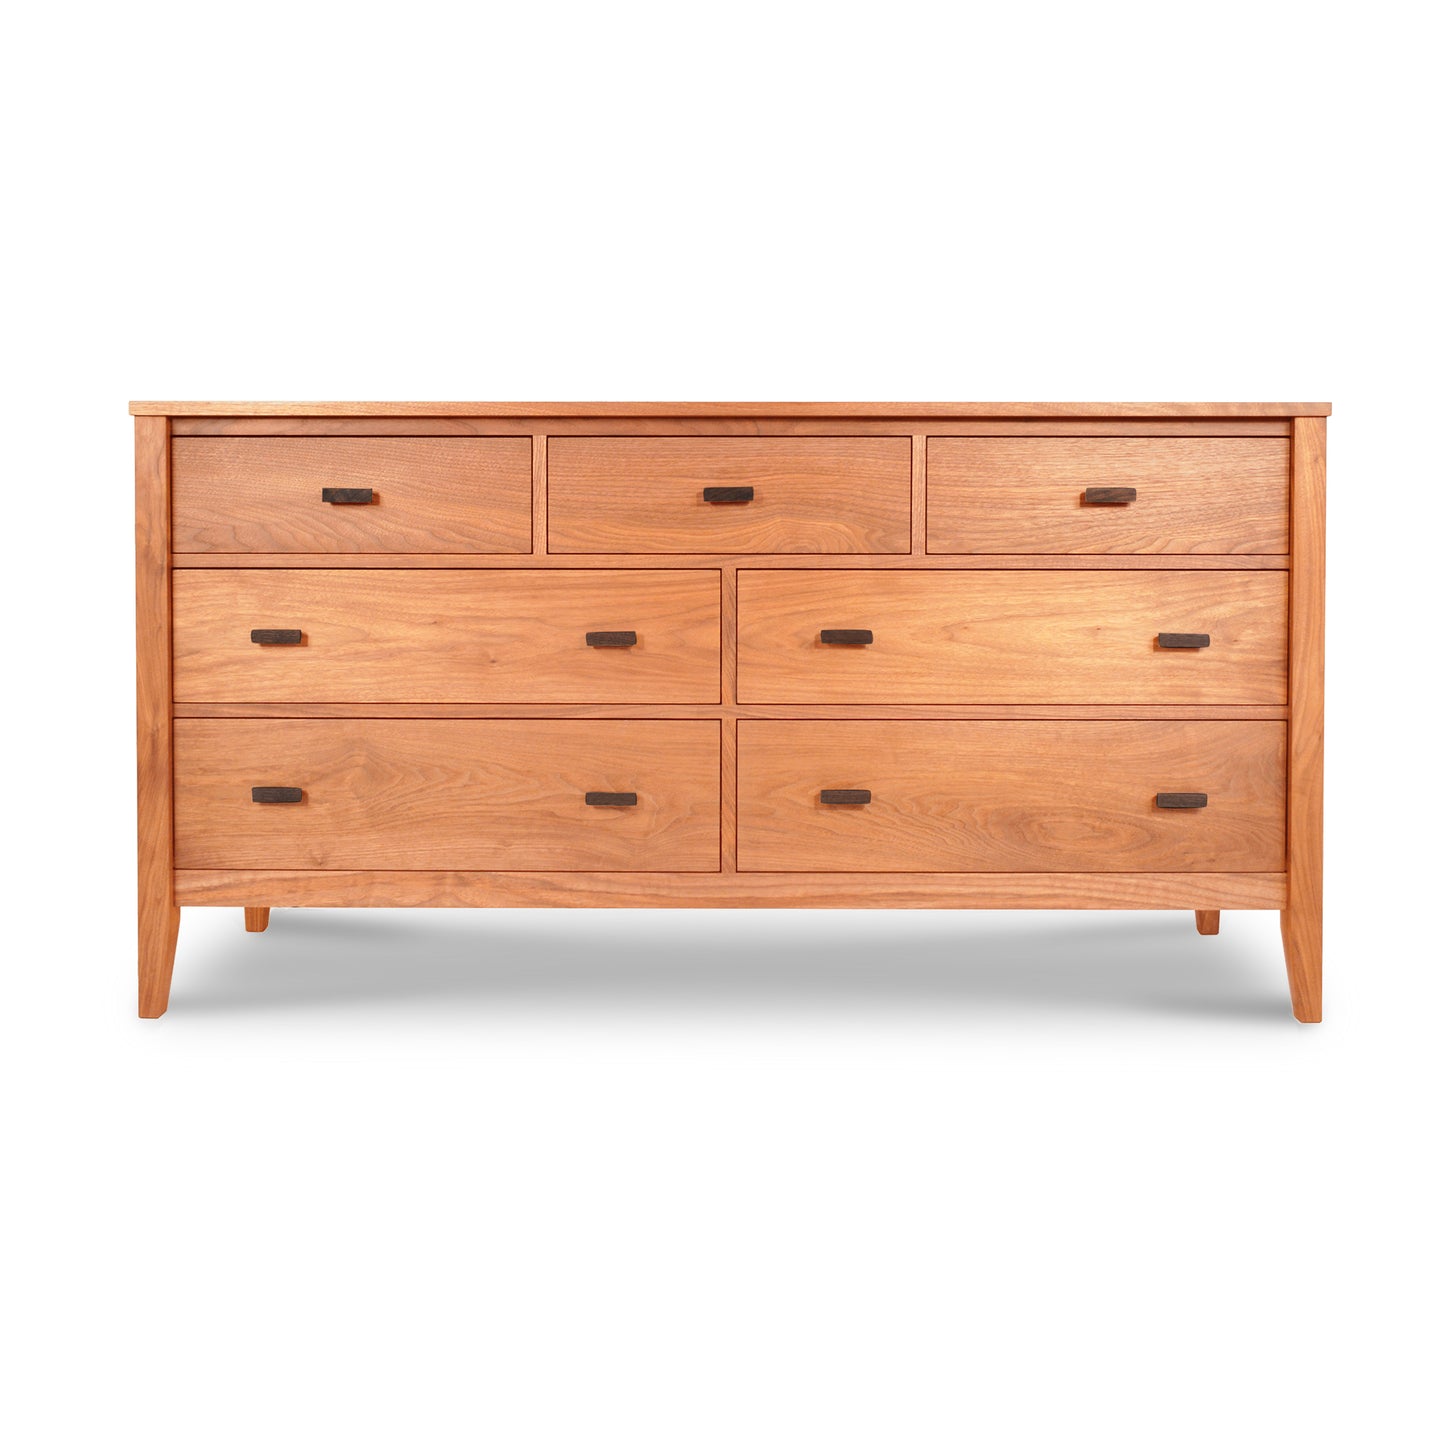 An image of the Maple Corner Woodworks Andover Modern 7-Drawer Dresser, combining modern design with traditional flair.